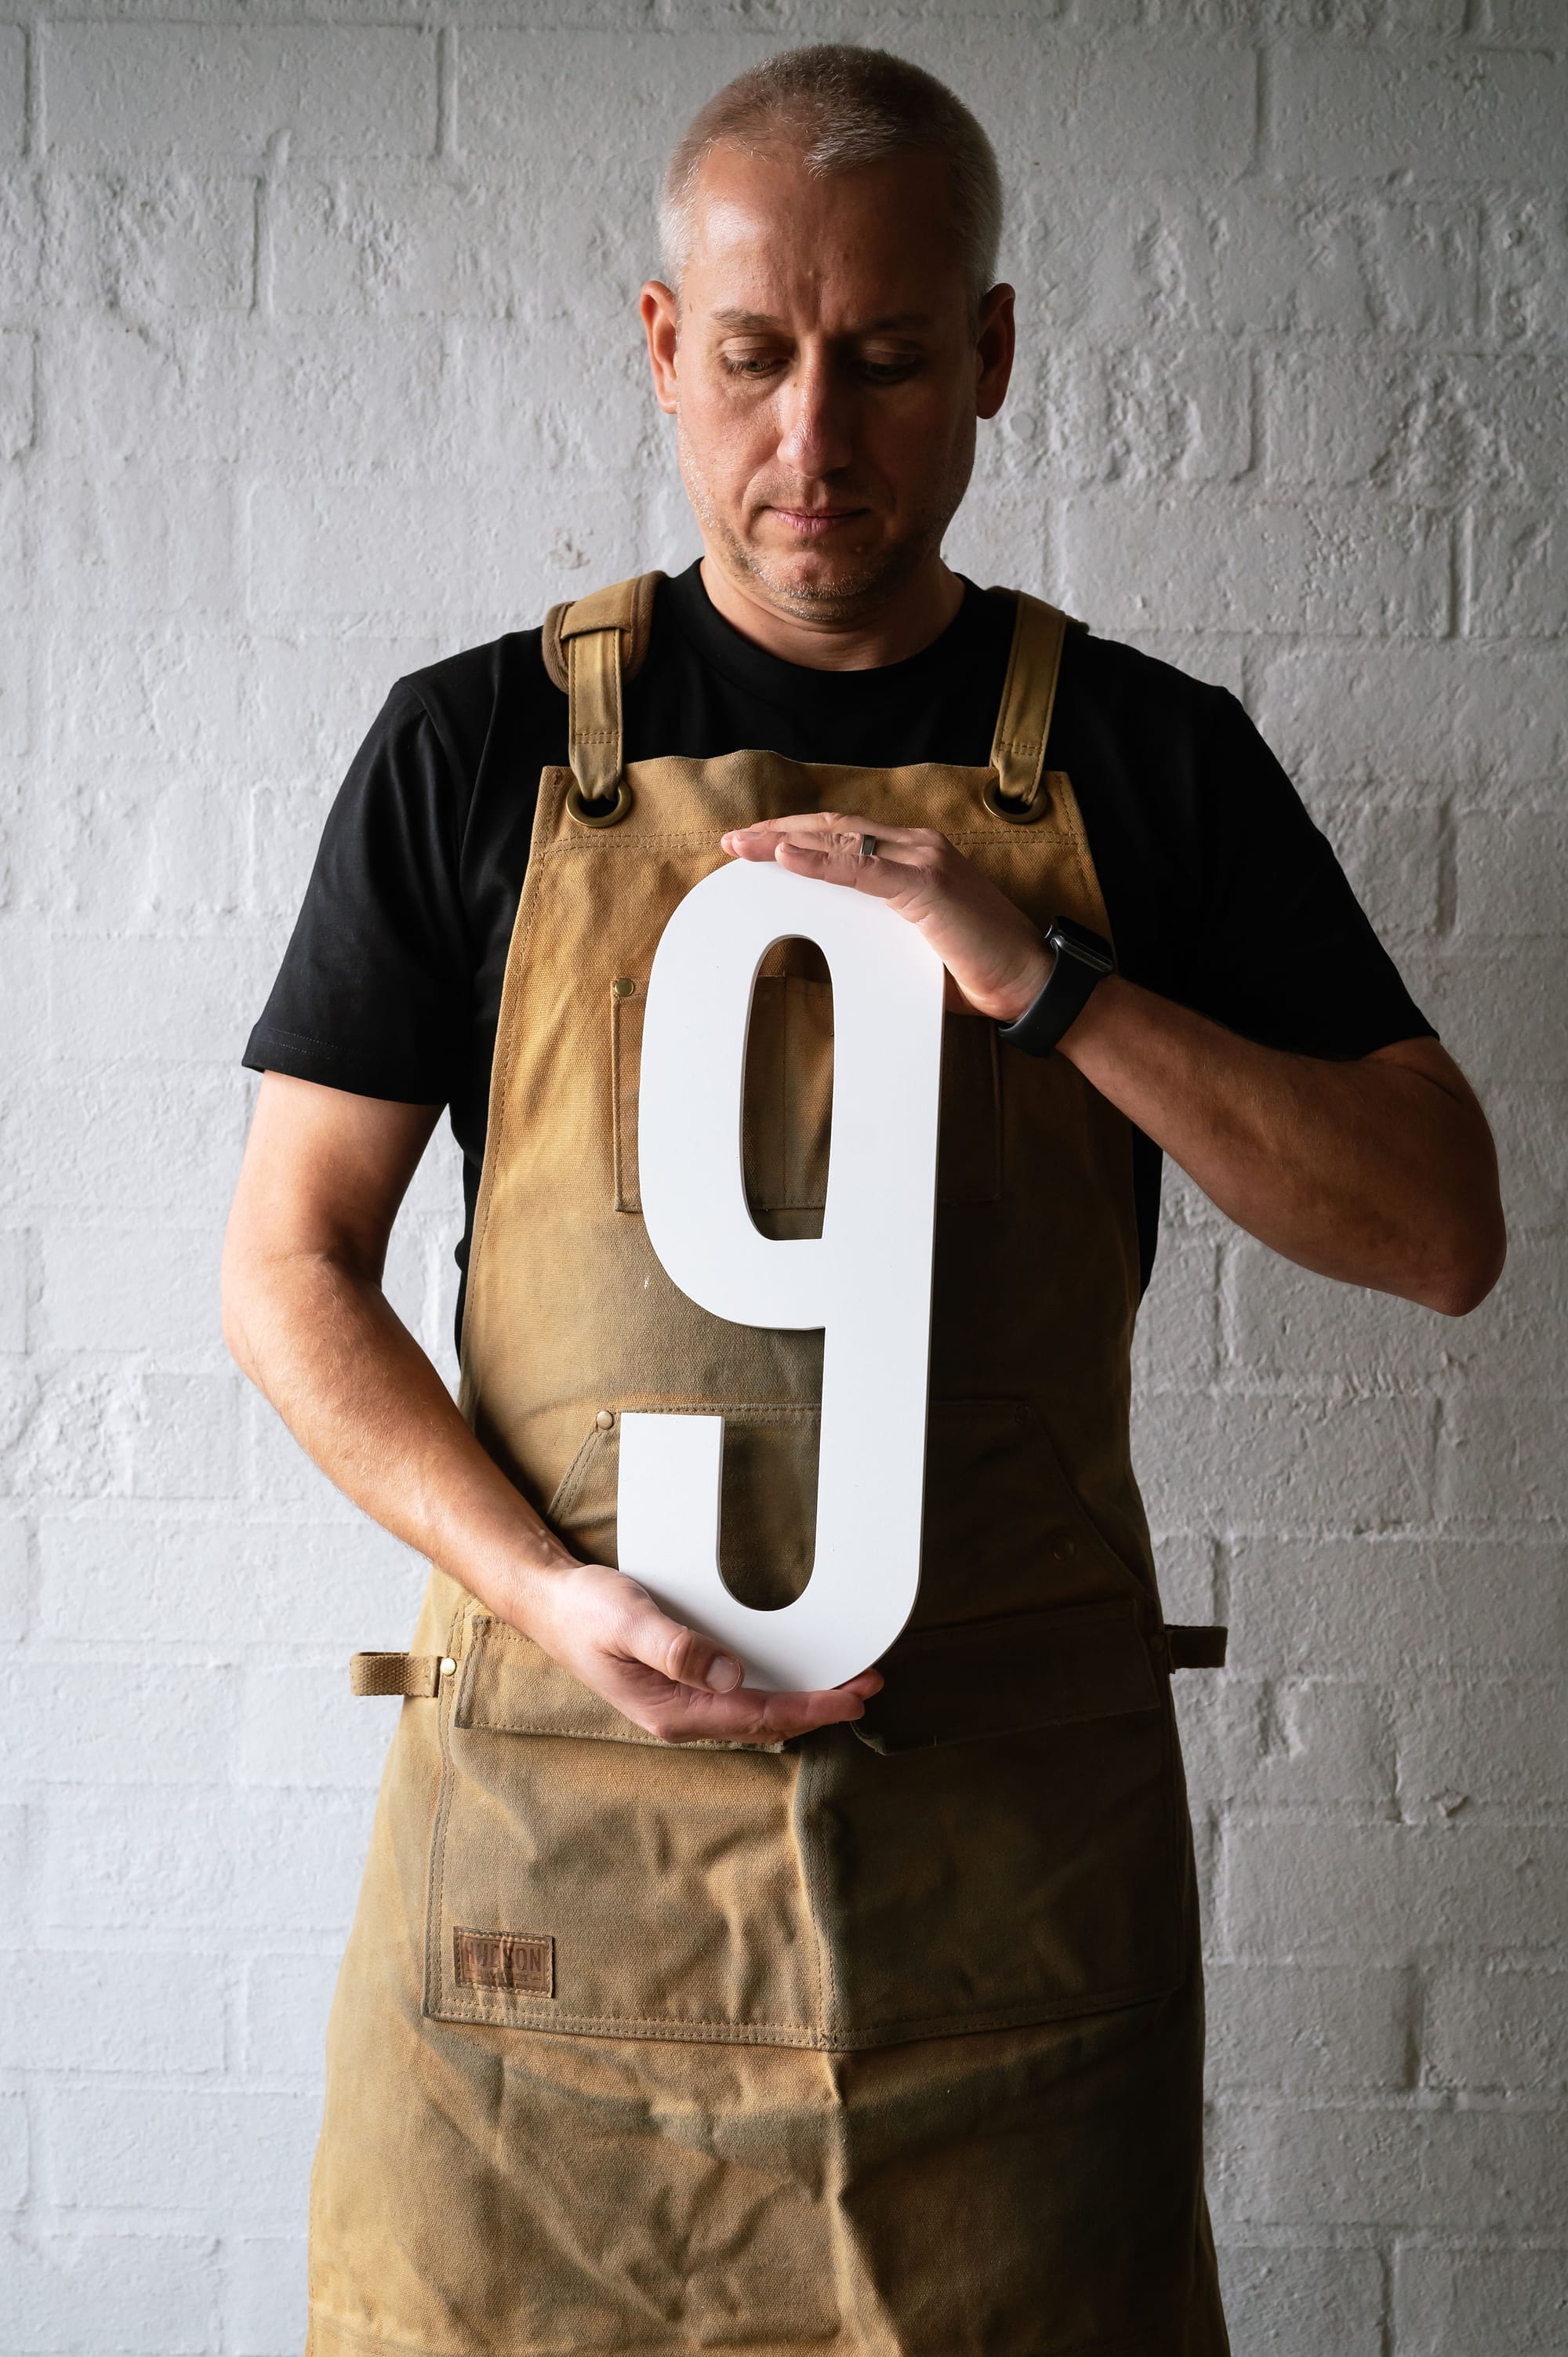 Peninsula House Numbers. Image copyright of Peninsula House Numbers. Man in black shirt and tan apron holding large white number 9 sign.